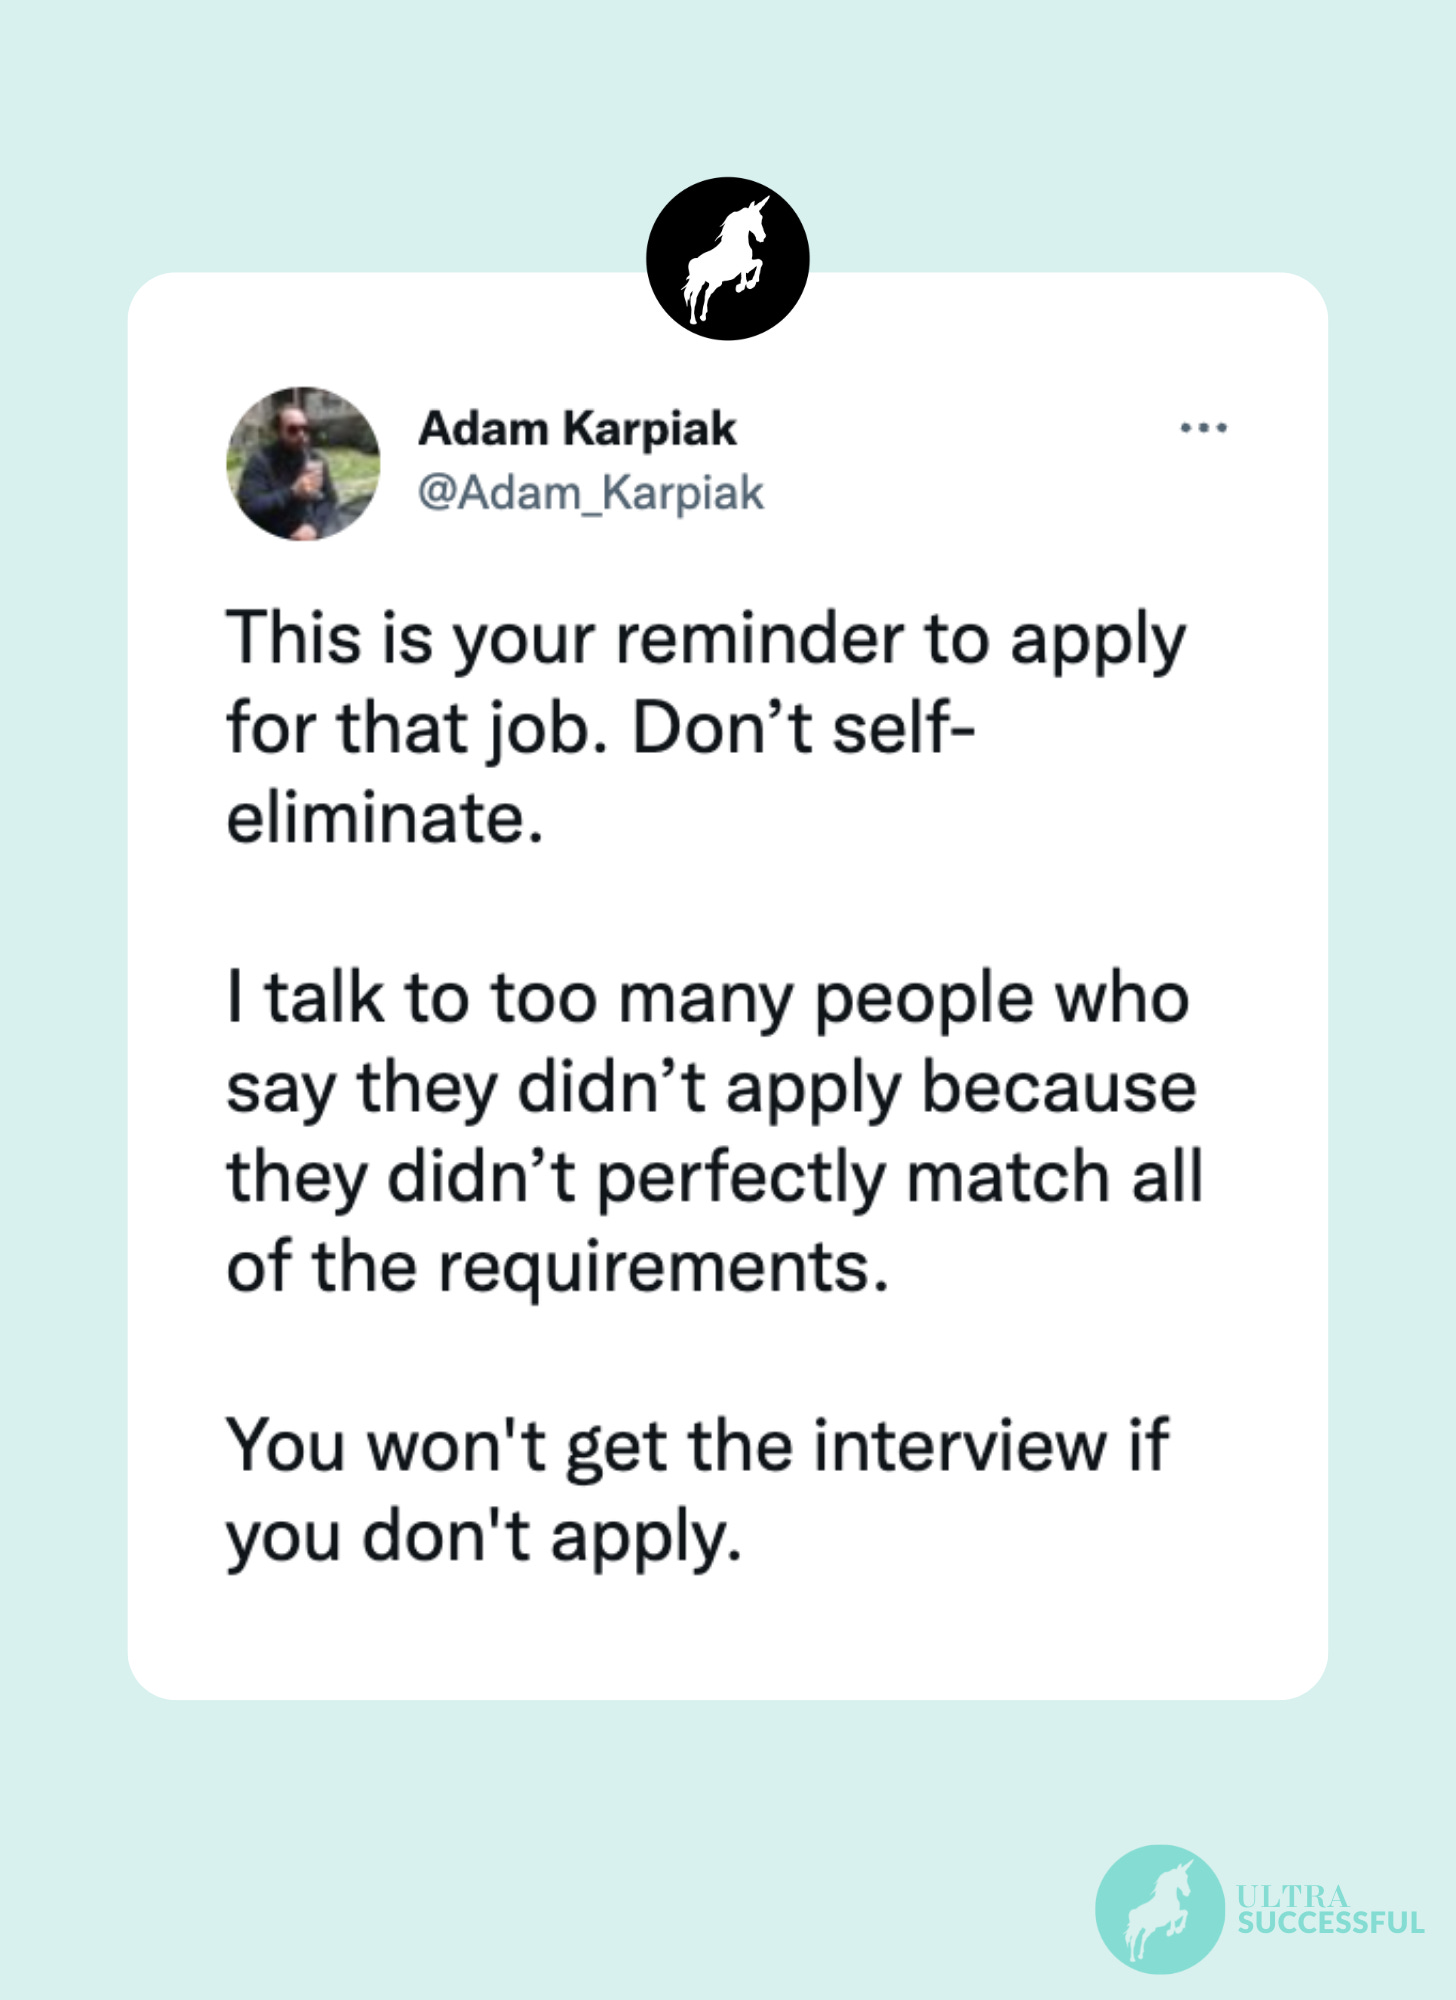 This is your reminder to apply for that job. Don’t self-eliminate.   I talk to too many people who say they didn’t apply because they didn’t perfectly match all of the requirements.  You won't get the interview if you don't apply.